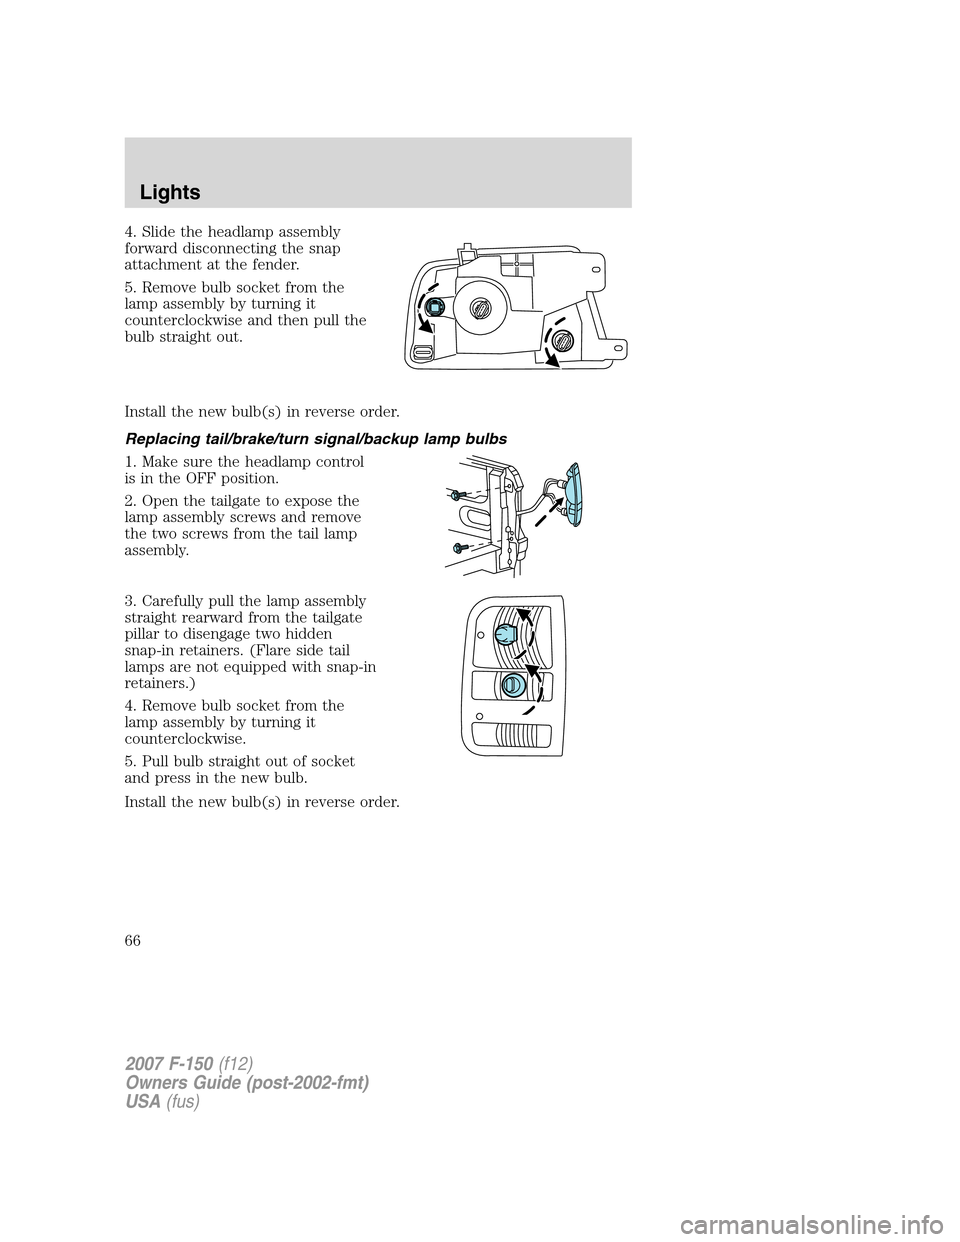 FORD F150 2007 11.G Owners Manual 4. Slide the headlamp assembly
forward disconnecting the snap
attachment at the fender.
5. Remove bulb socket from the
lamp assembly by turning it
counterclockwise and then pull the
bulb straight out.